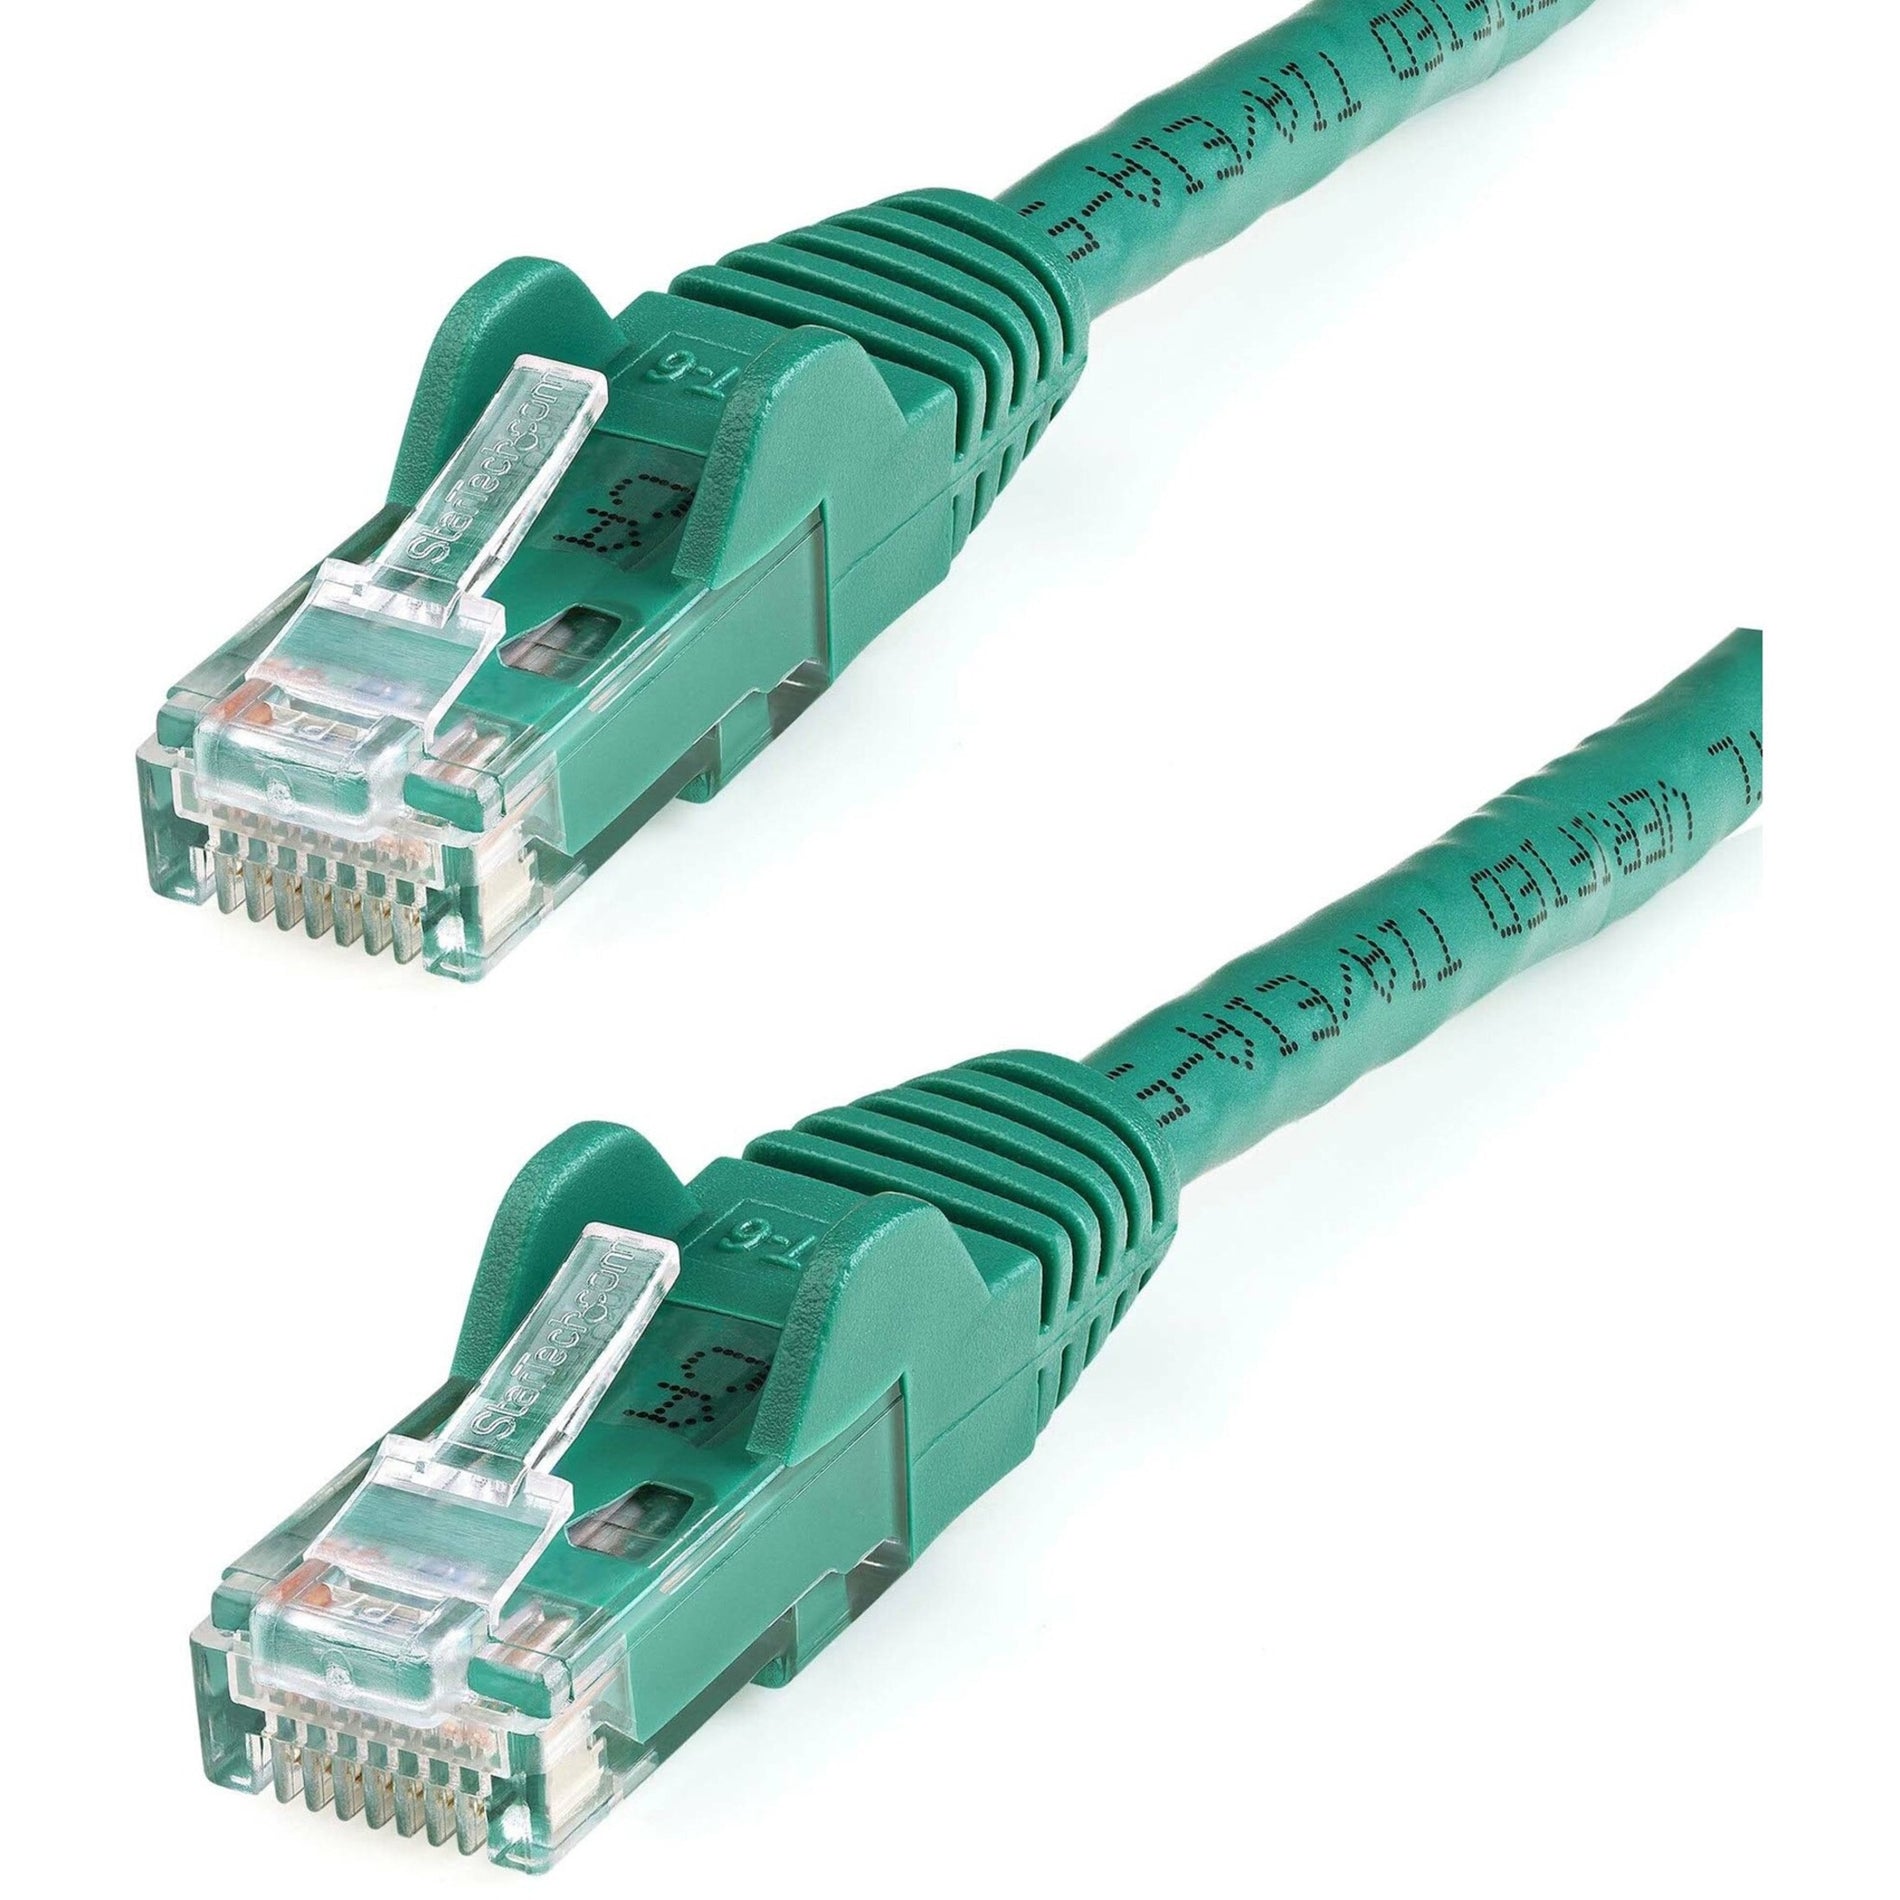 StarTech.com N6PATCH75GN 75 ft. Cat6 Patch Cable - Green, Lifetime Warranty, Gold Connectors, Snagless, CMG Rated